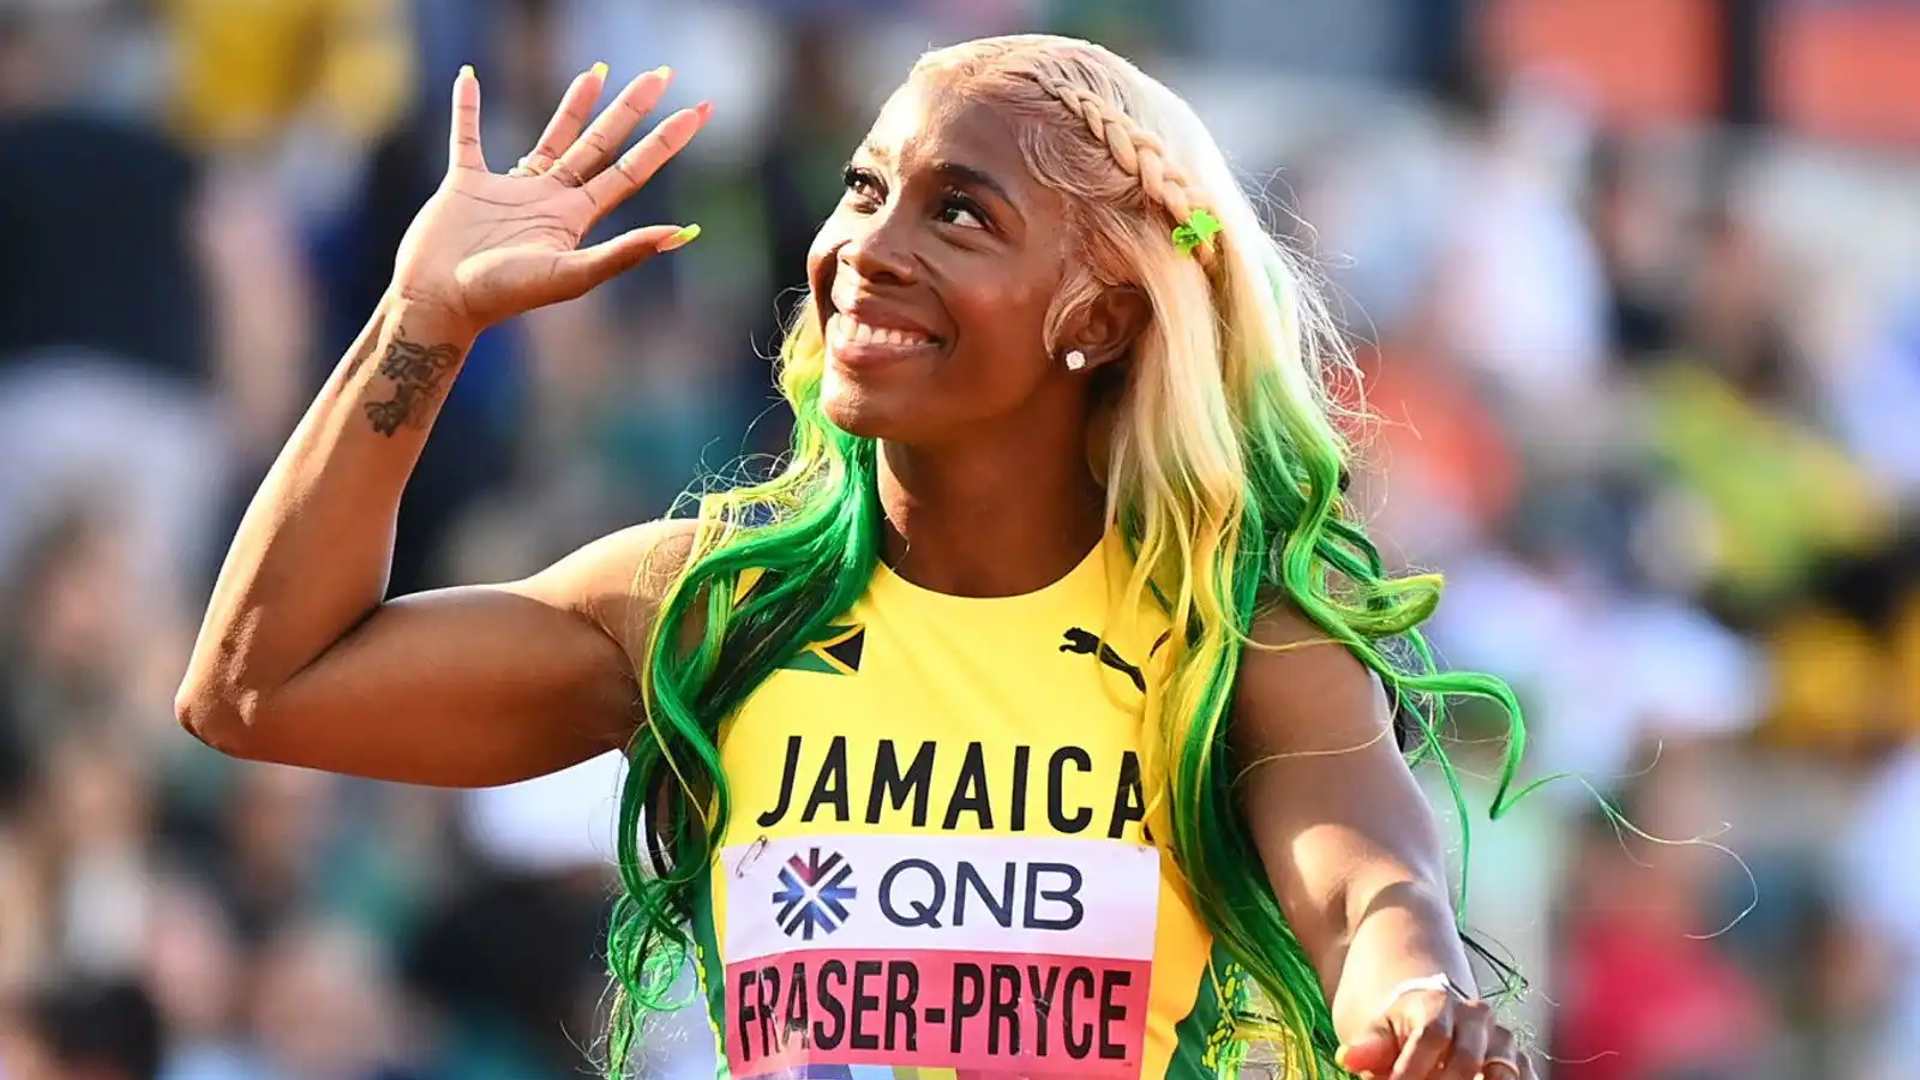 Shelly-Ann Fraser-Pryce will be defending her title in the women's 100m at the World Athletics Championships 2023 (Image Credits: Twitter)